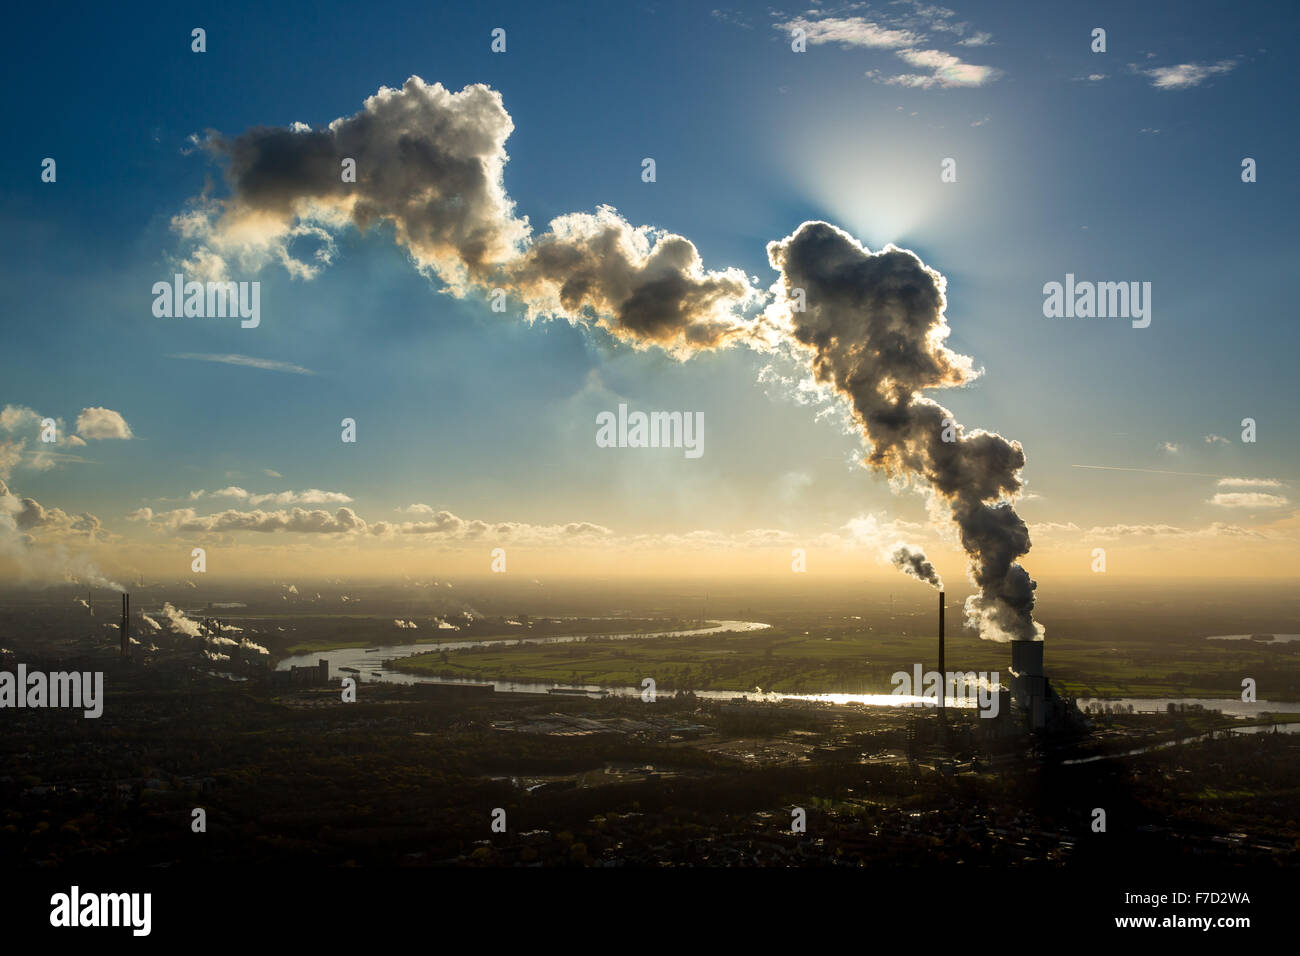 Coal plant, STEAG power plant Walsum, Duisburg-Walsum, before Rheinbogen at Beekerwerth and Marxloh, Backlit, Cloud of Smoke, Stock Photo